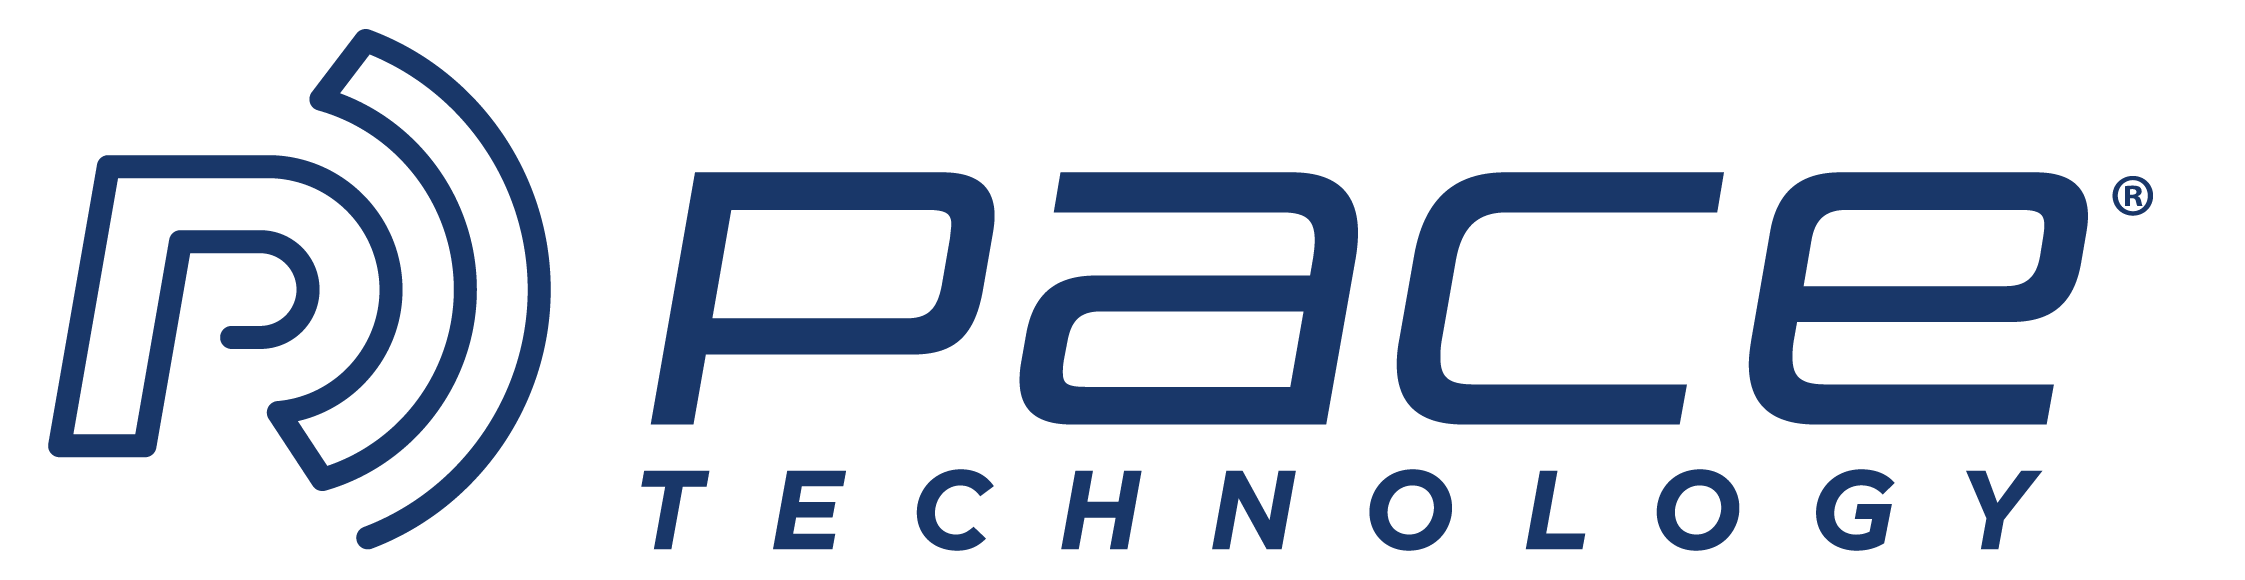 Pace Technology, offered on select E-Z-GO and Cushman vehicles